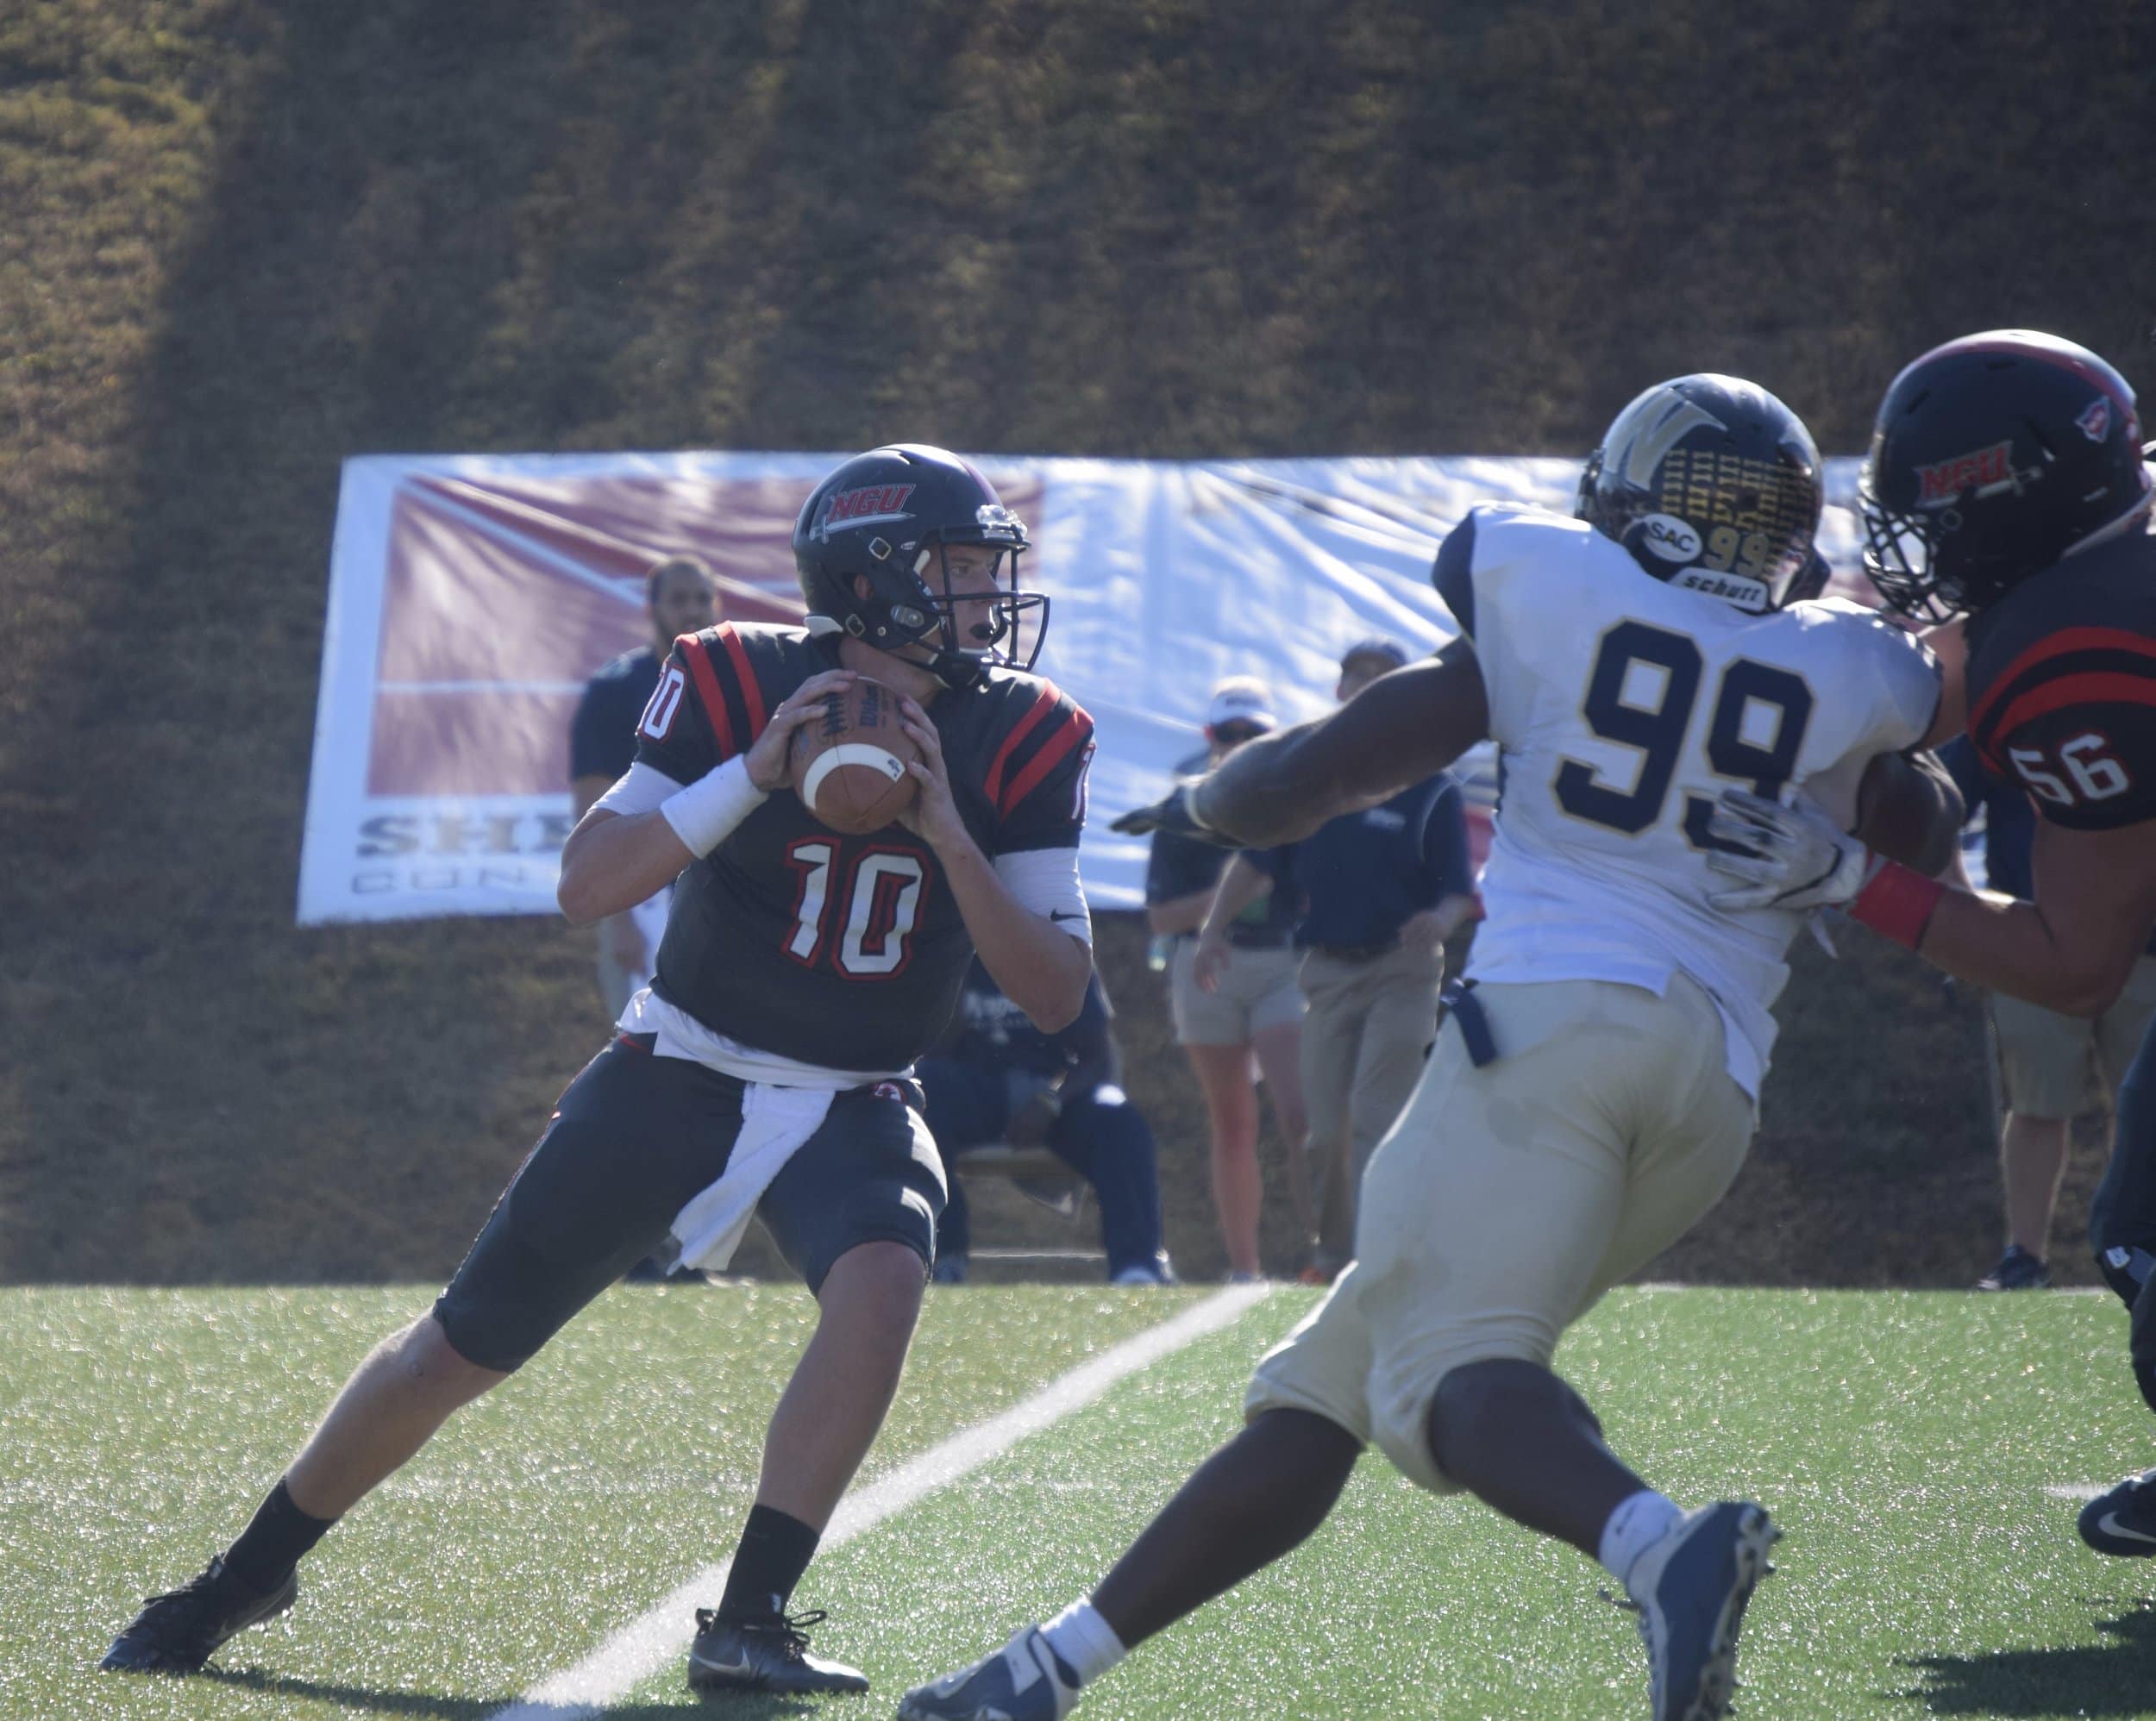 NGU's quarterback, Will Hunter, is ready to make a play.